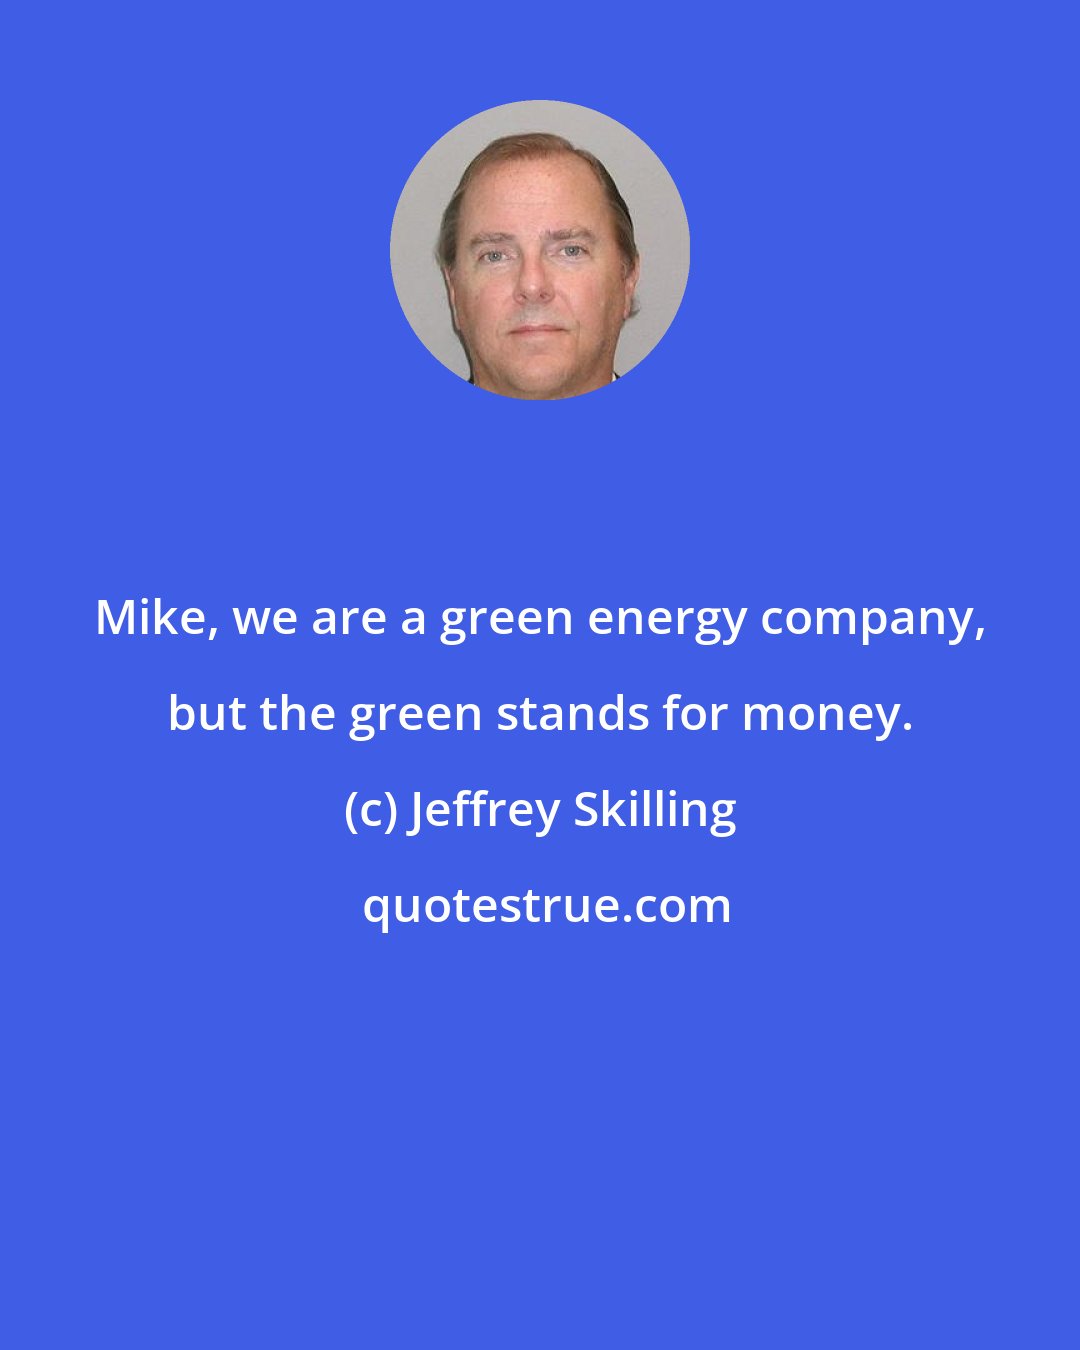 Jeffrey Skilling: Mike, we are a green energy company, but the green stands for money.